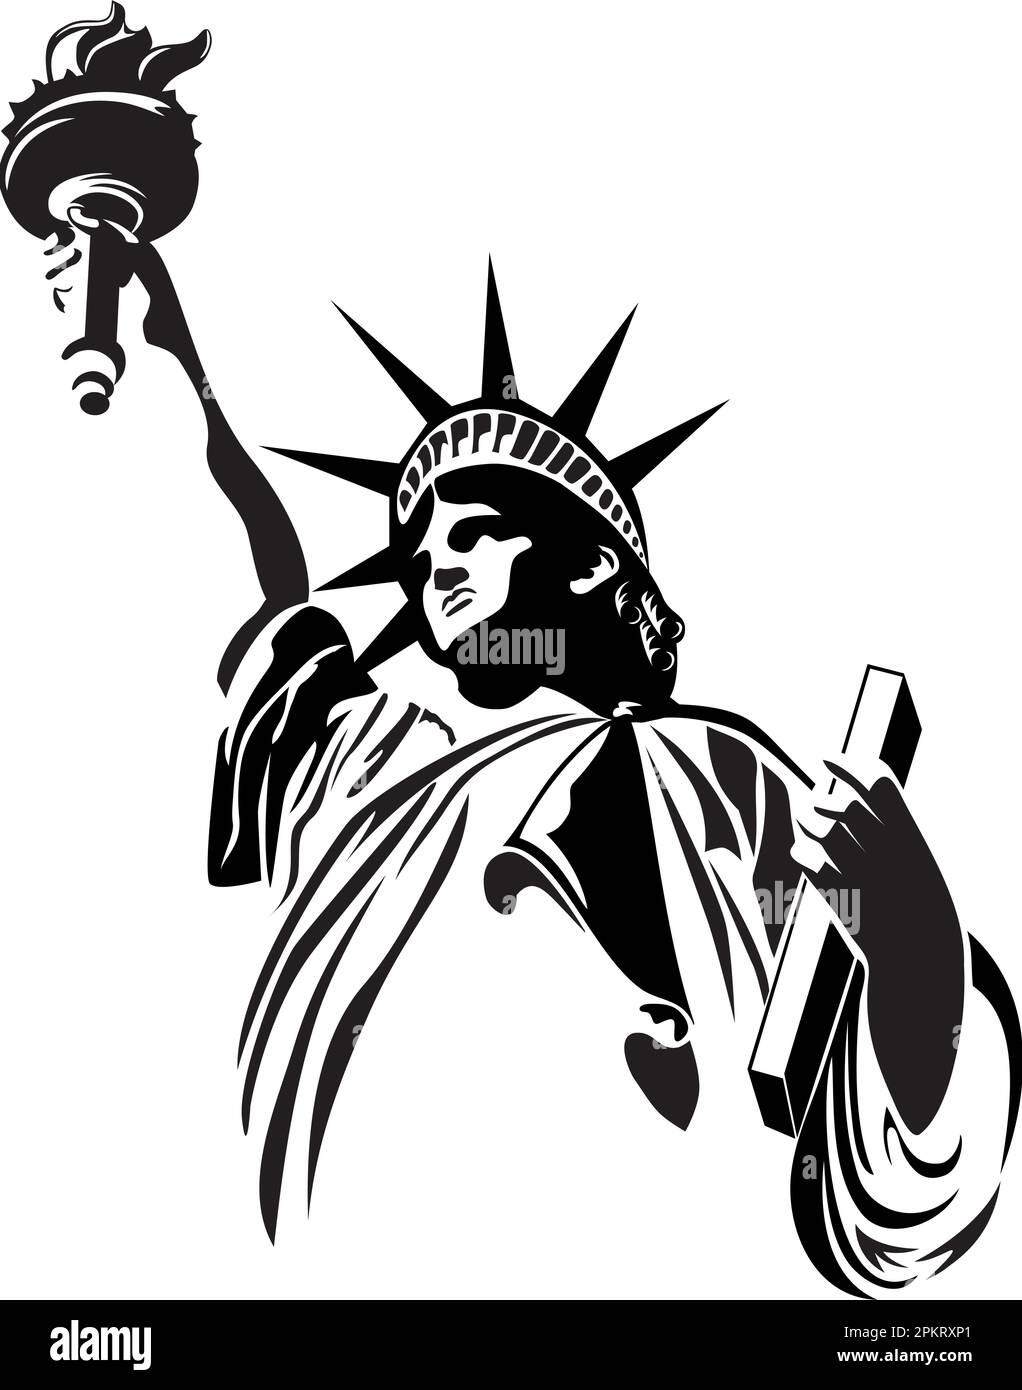 Statue of Liberty, New York City 'Lady of the Harbor' as 1/c black laser-safe Illustration.  Also Available in Color and Grayscale versions. Stock Vector